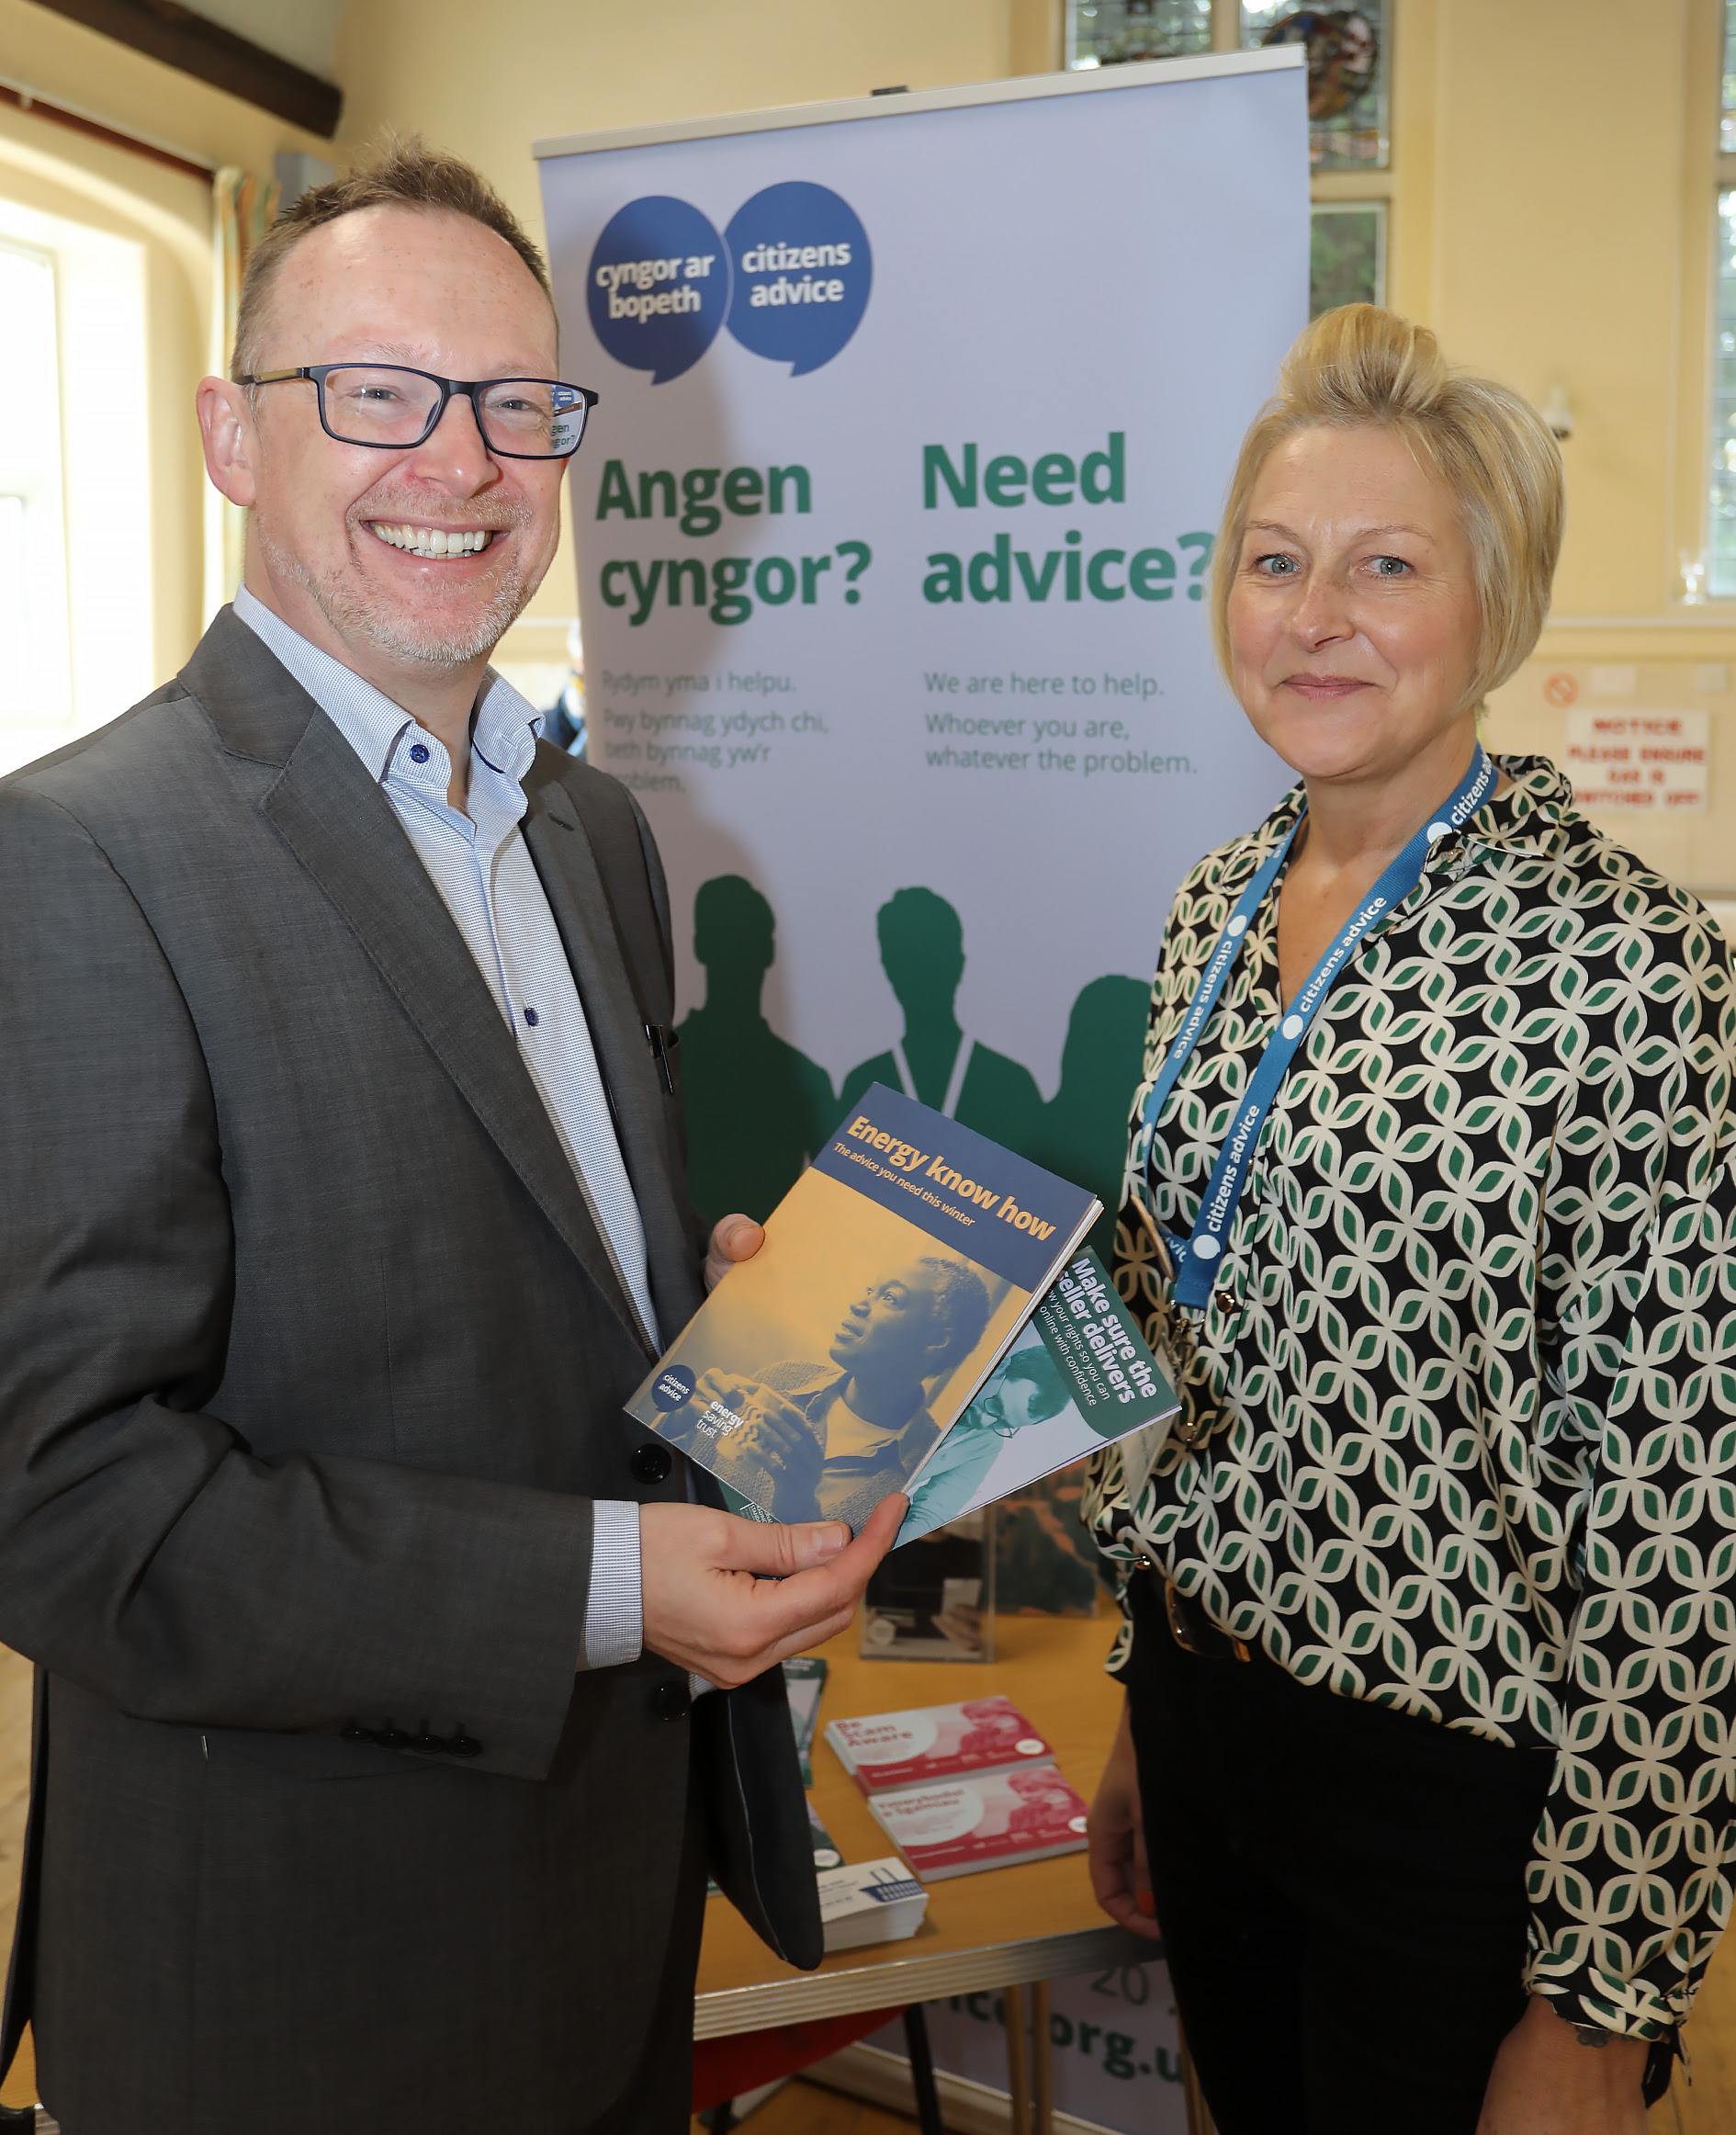 Russell George MS with a Citizens Advice representative.